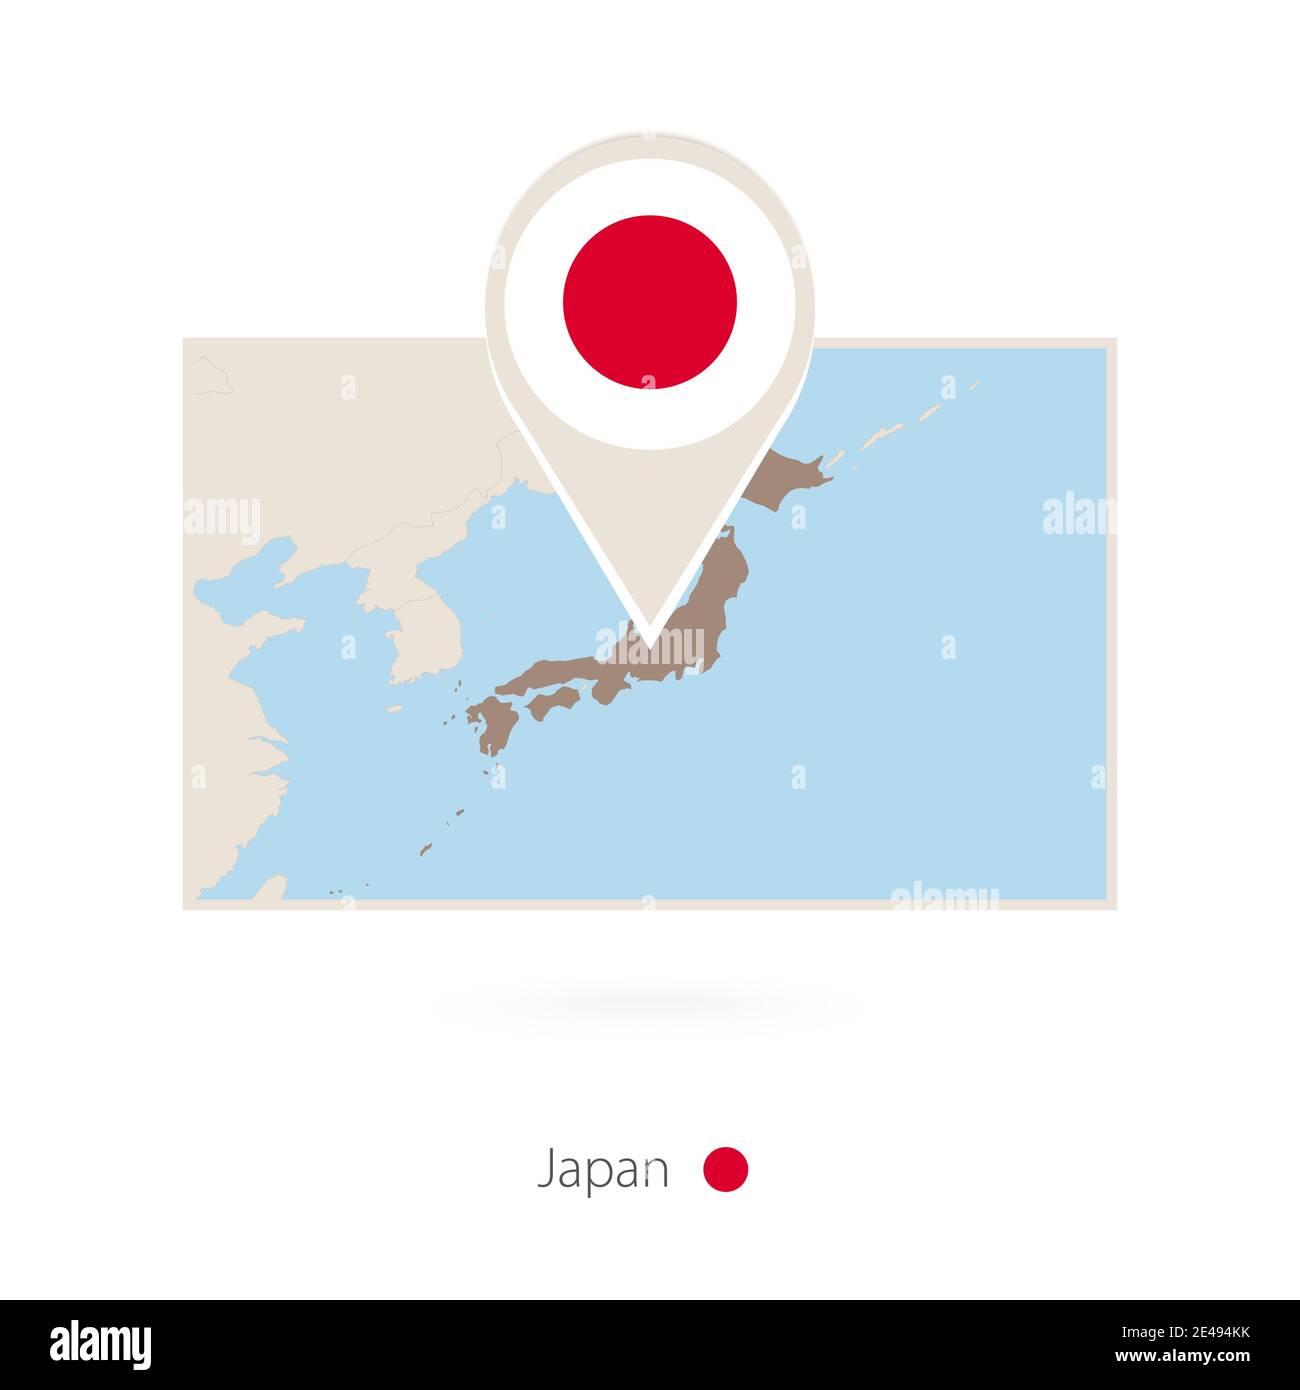 Rectangular map of Japan with pin icon of Japan Stock Vector